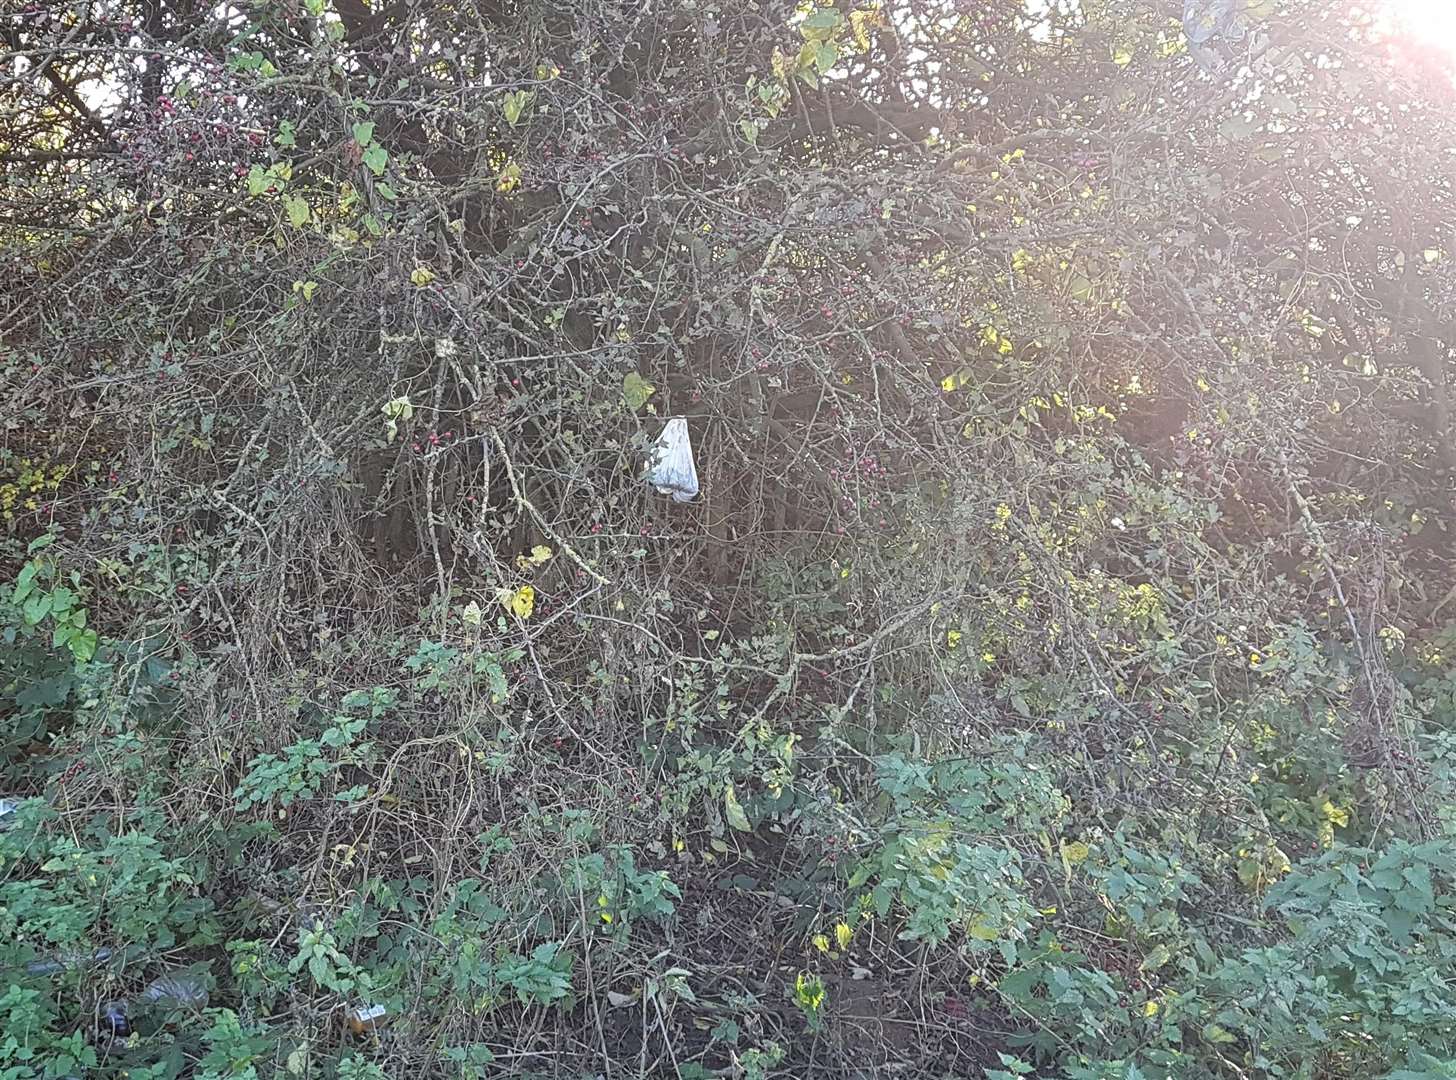 A bag of poo left by a lorry driver hanging on a tree